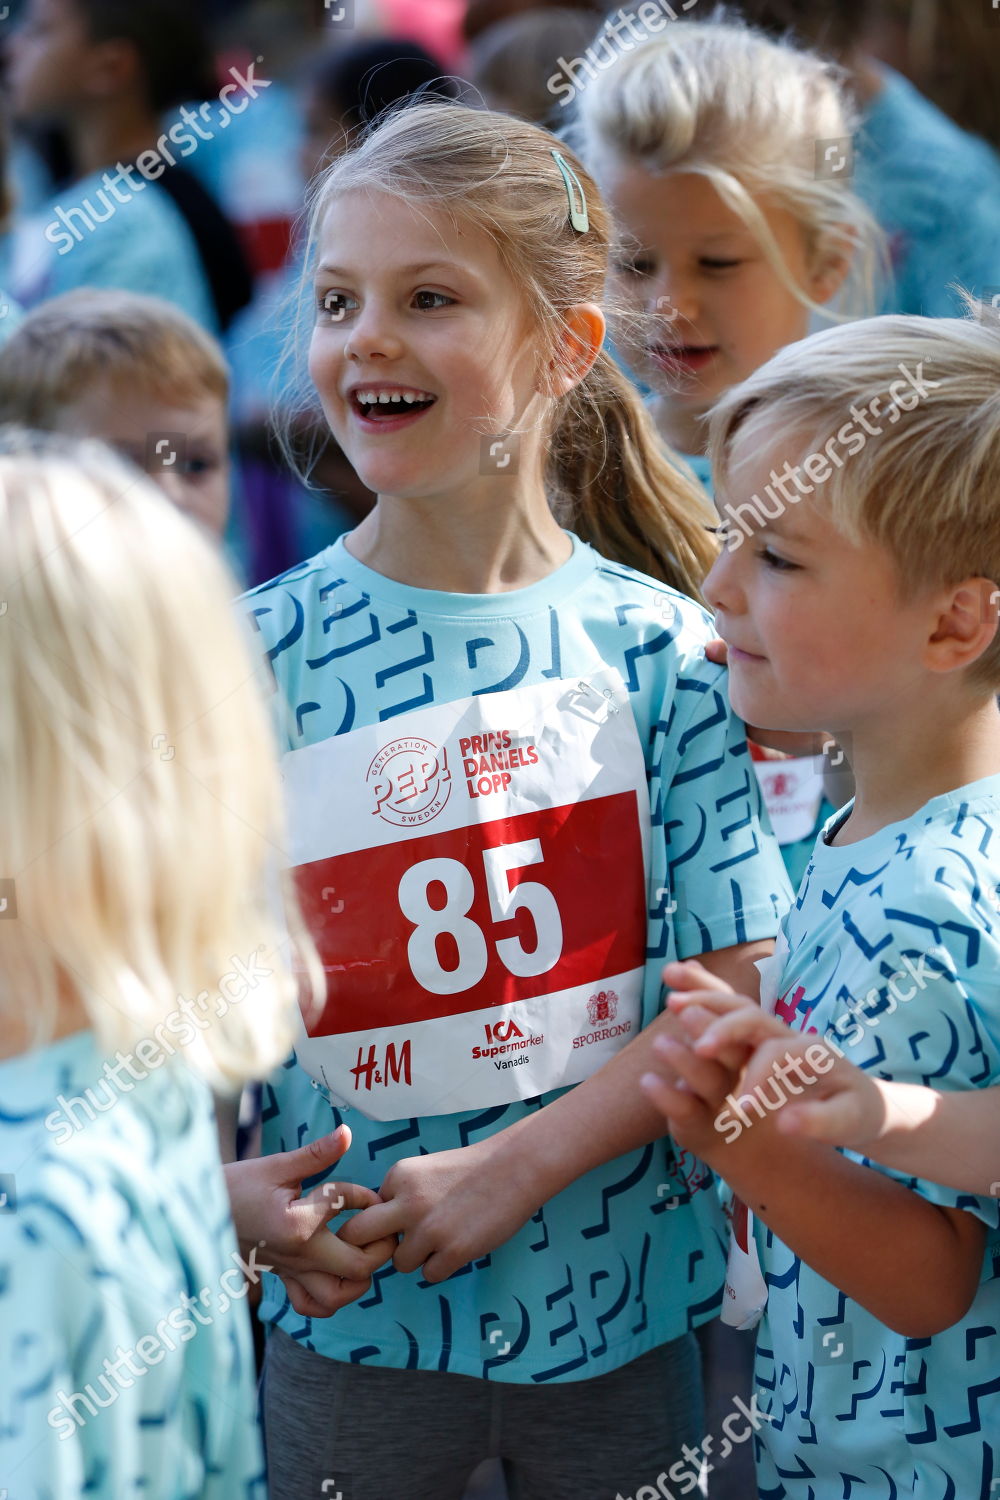 race-and-pep-day-stockholm-sweden-shutterstock-editorial-9884111m.jpg